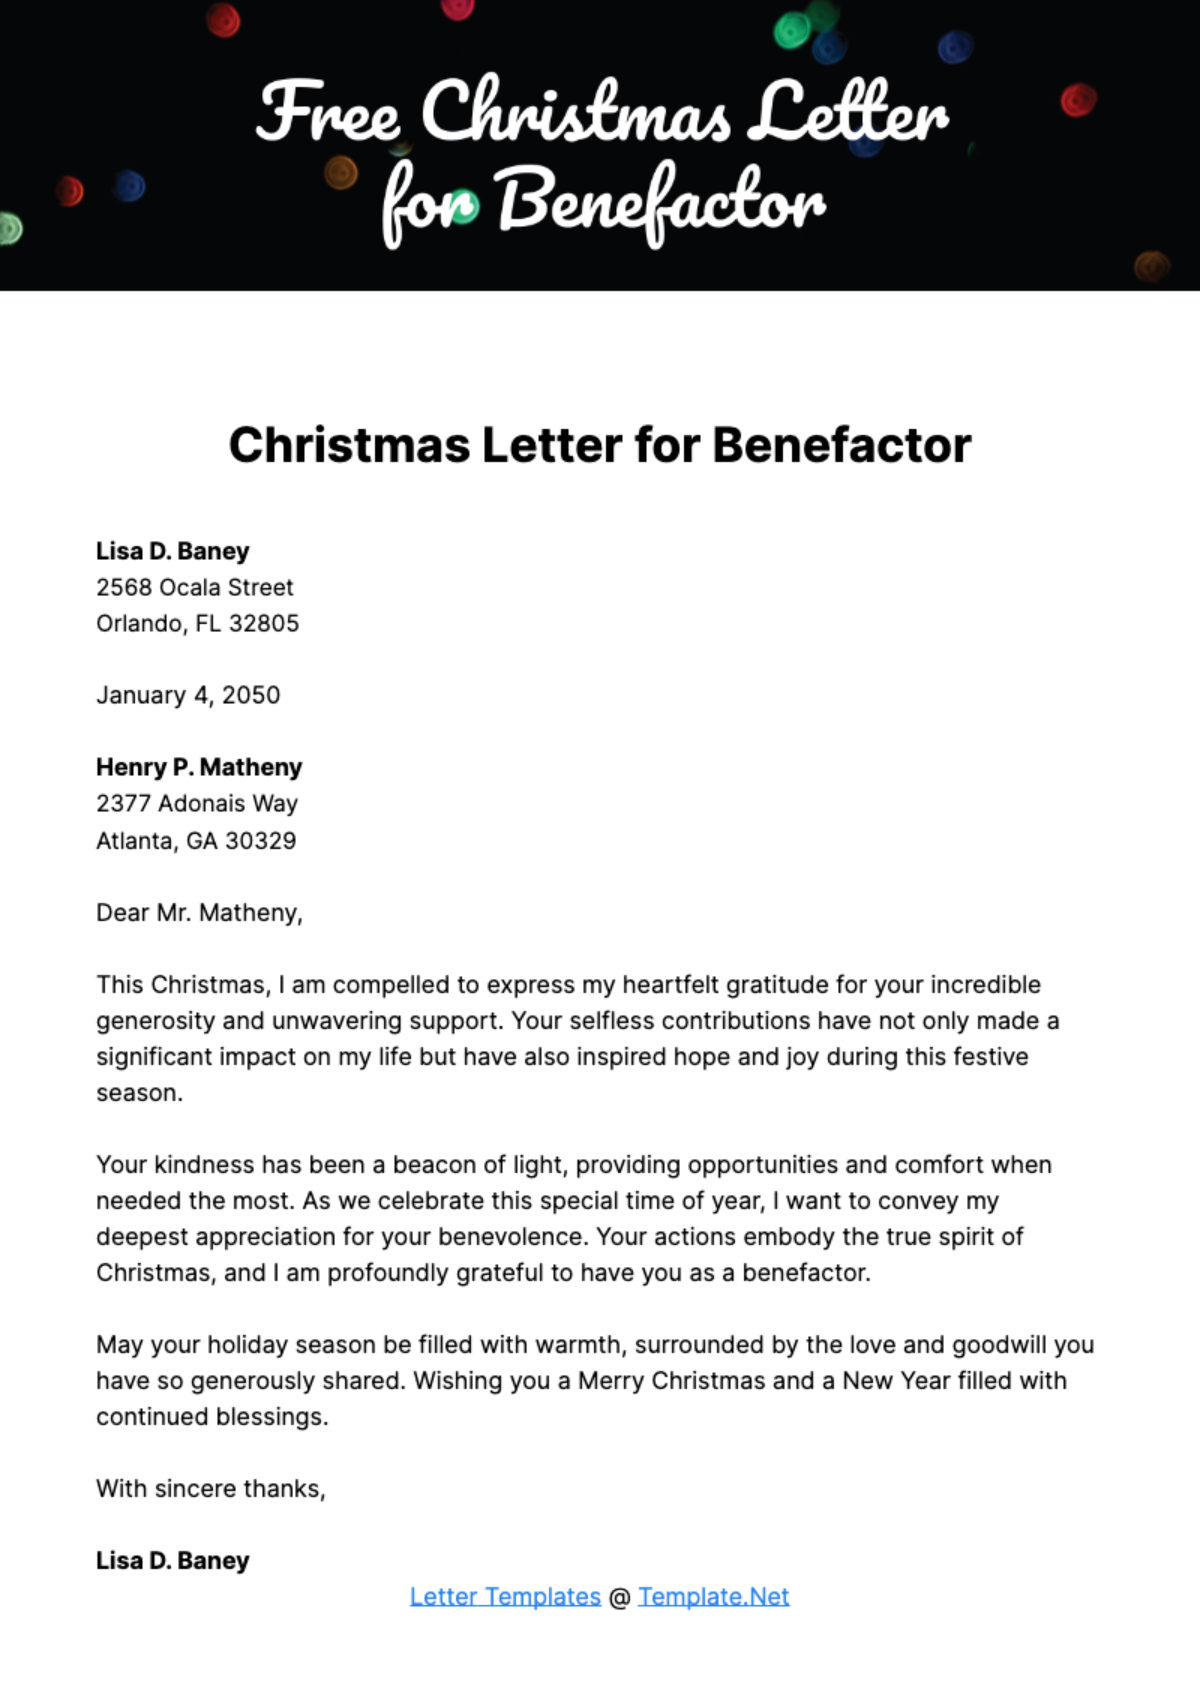 Christmas Letter for Benefactor Template